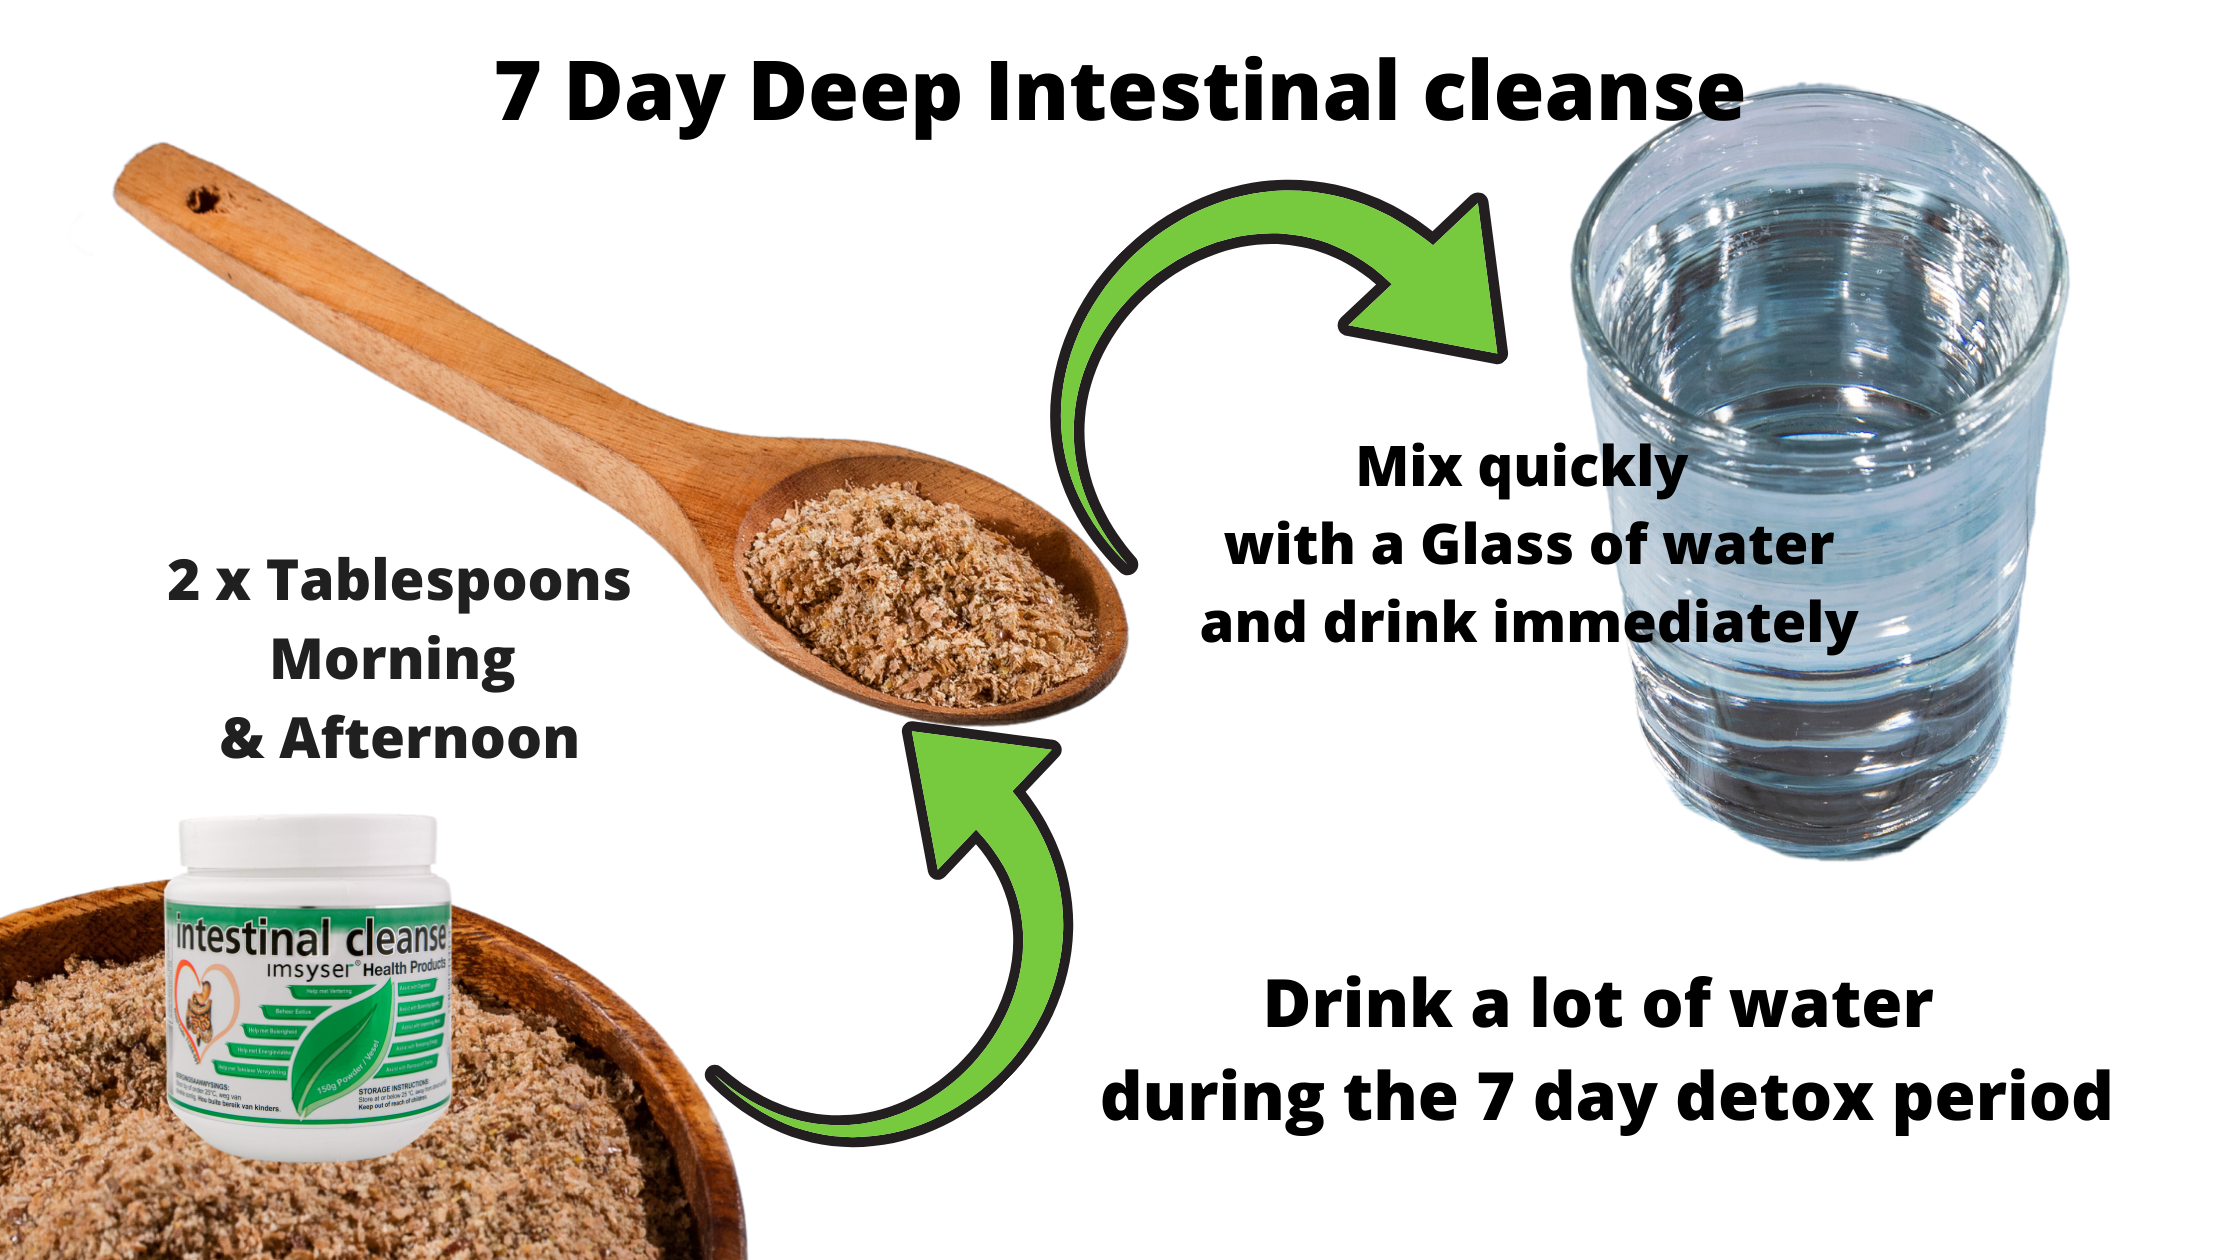 THE IMPORTANCE OF A DEEP COLON CLEANSE